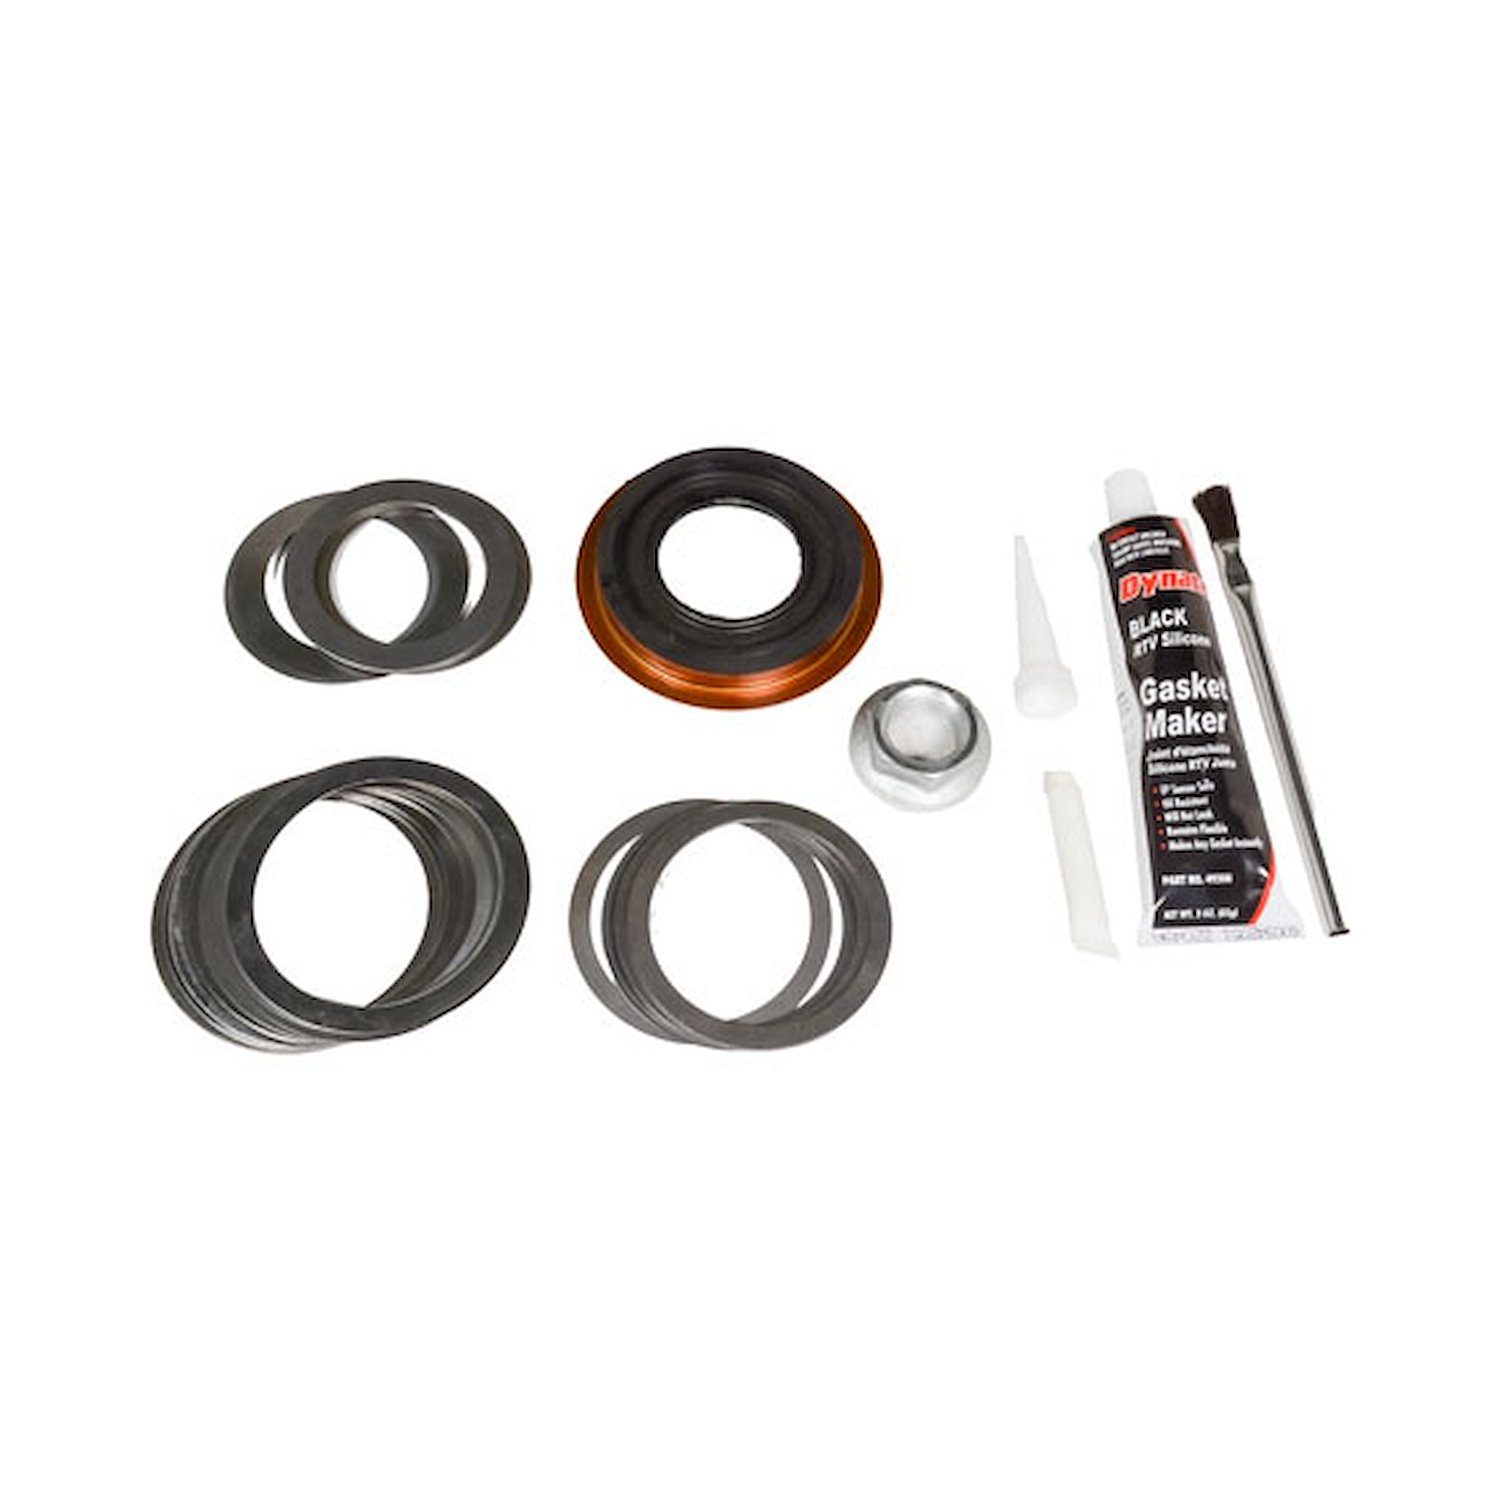 Minimum Install Kit For Toyota Tacoma 8.75 in.